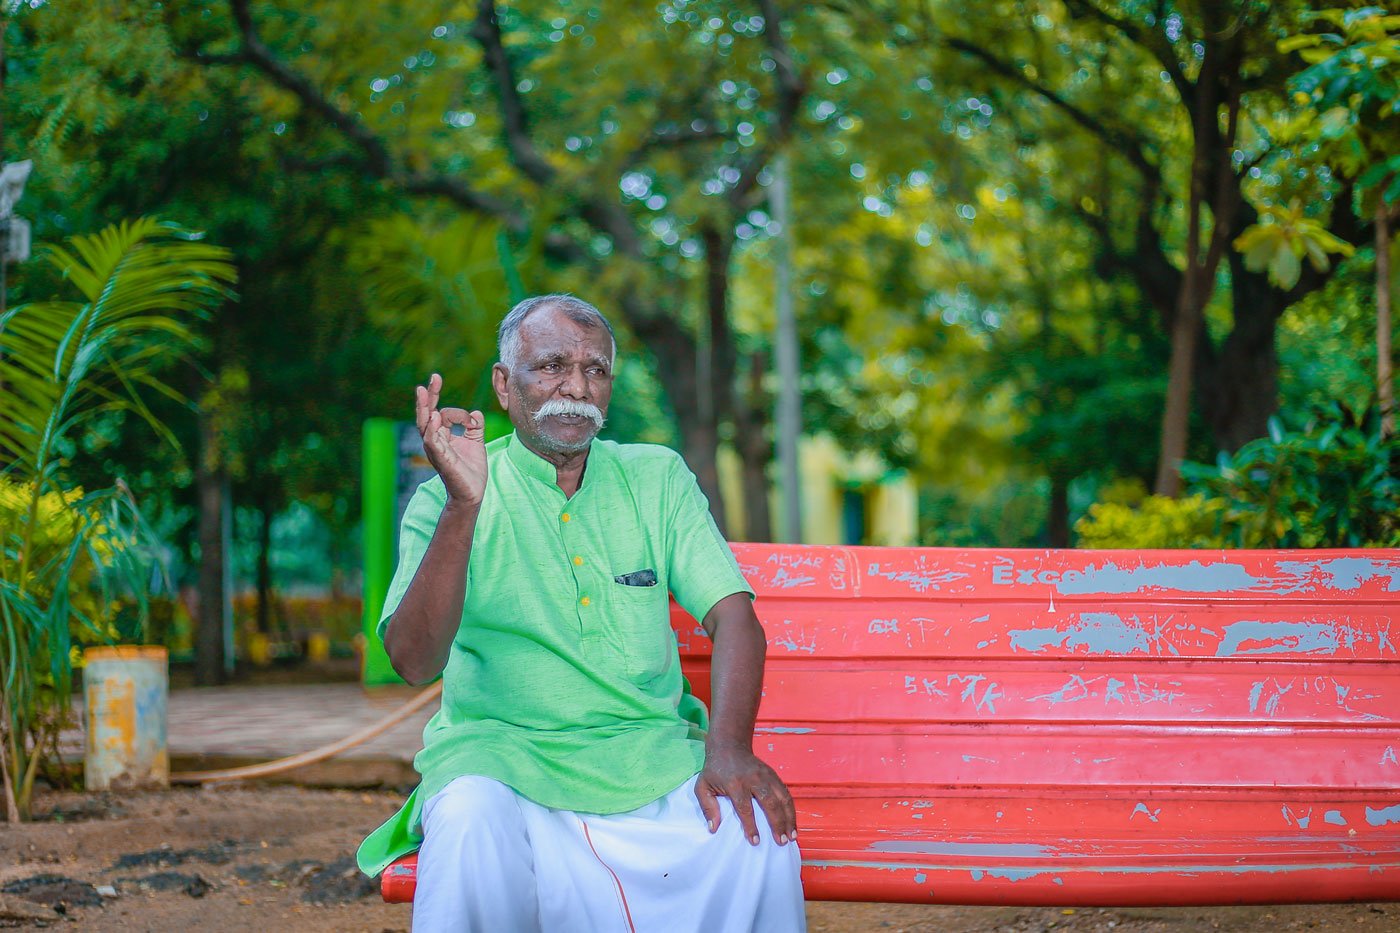 Cho Dharman: 'The Covid crisis is an ‘idiyappa sikkal’ [the tangle of rice strings in rice hoppers]. The poor are suffering, how do we help them?' 